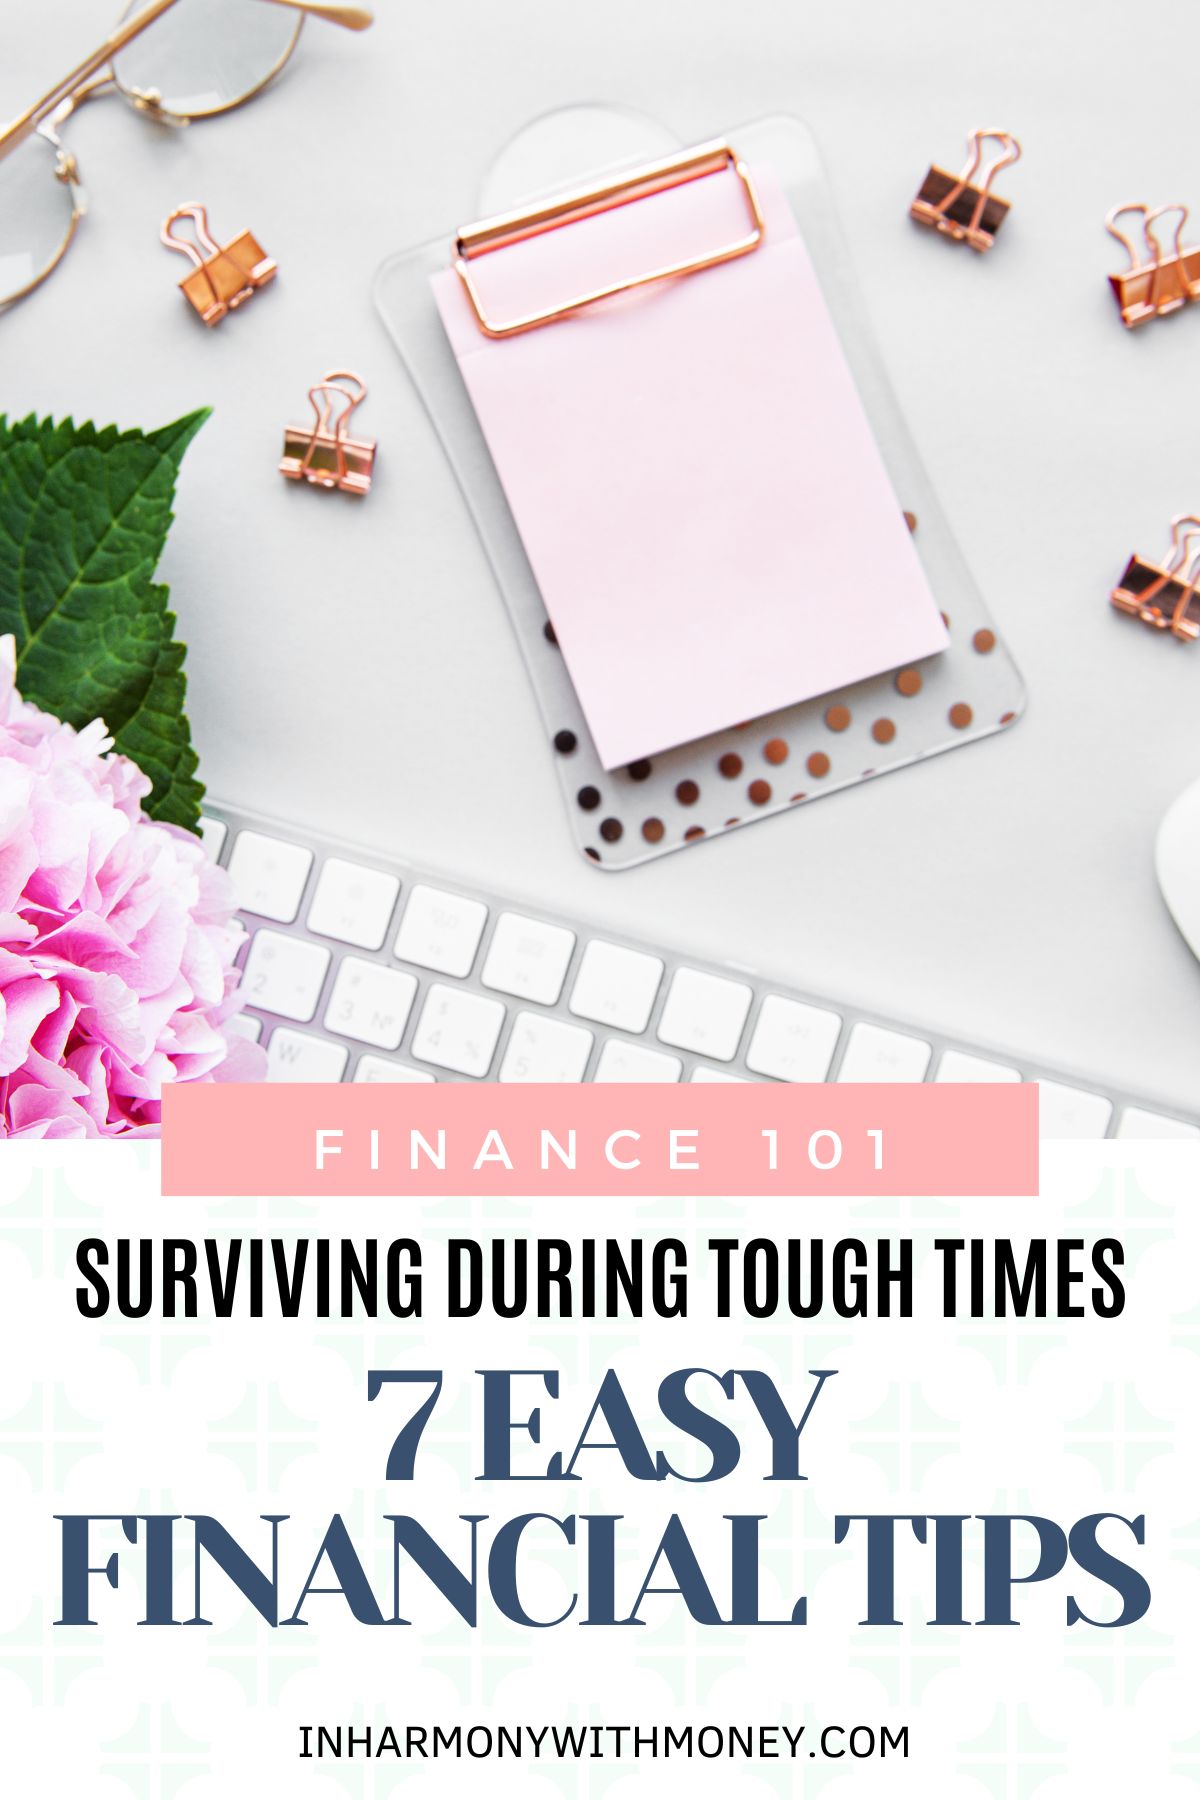 desk with pink clipboard, rose gold binder clips, glasses, pink flowers and a computer keyboard with text surviving during tough times, 7 easy financial tips